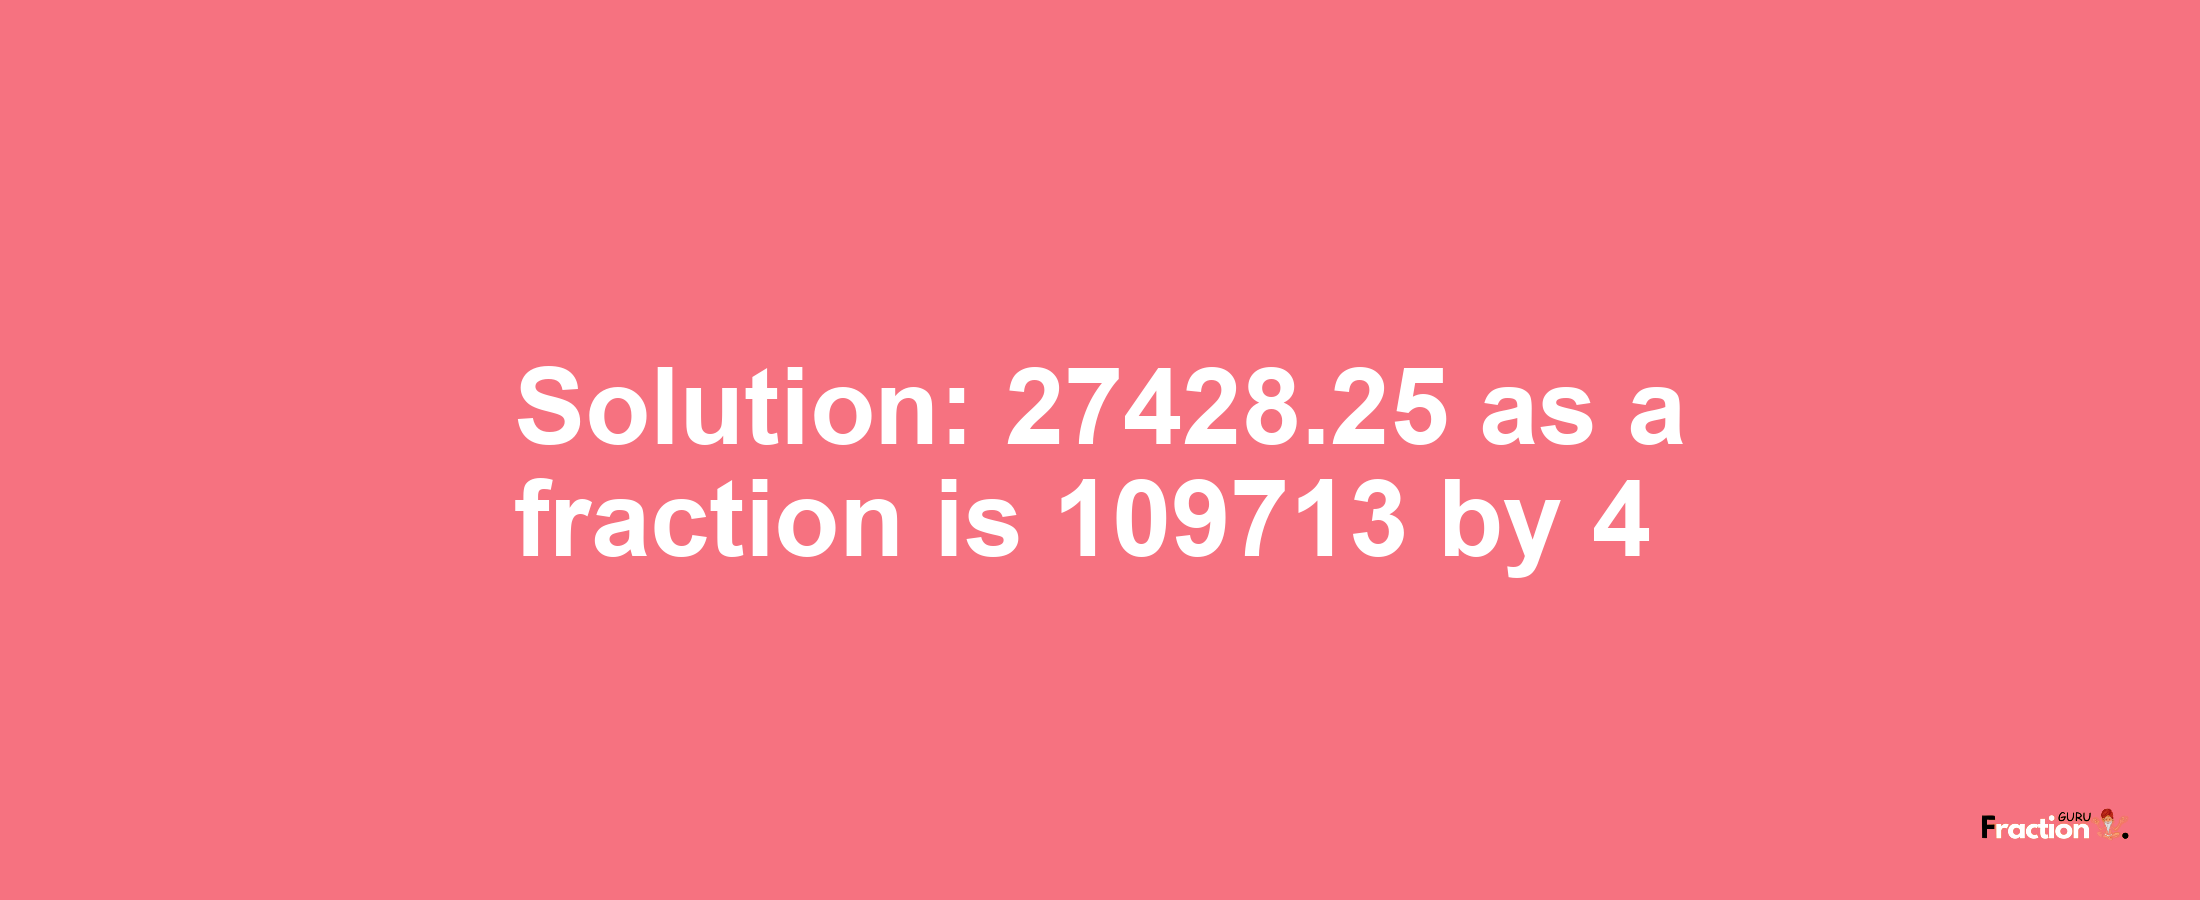 Solution:27428.25 as a fraction is 109713/4